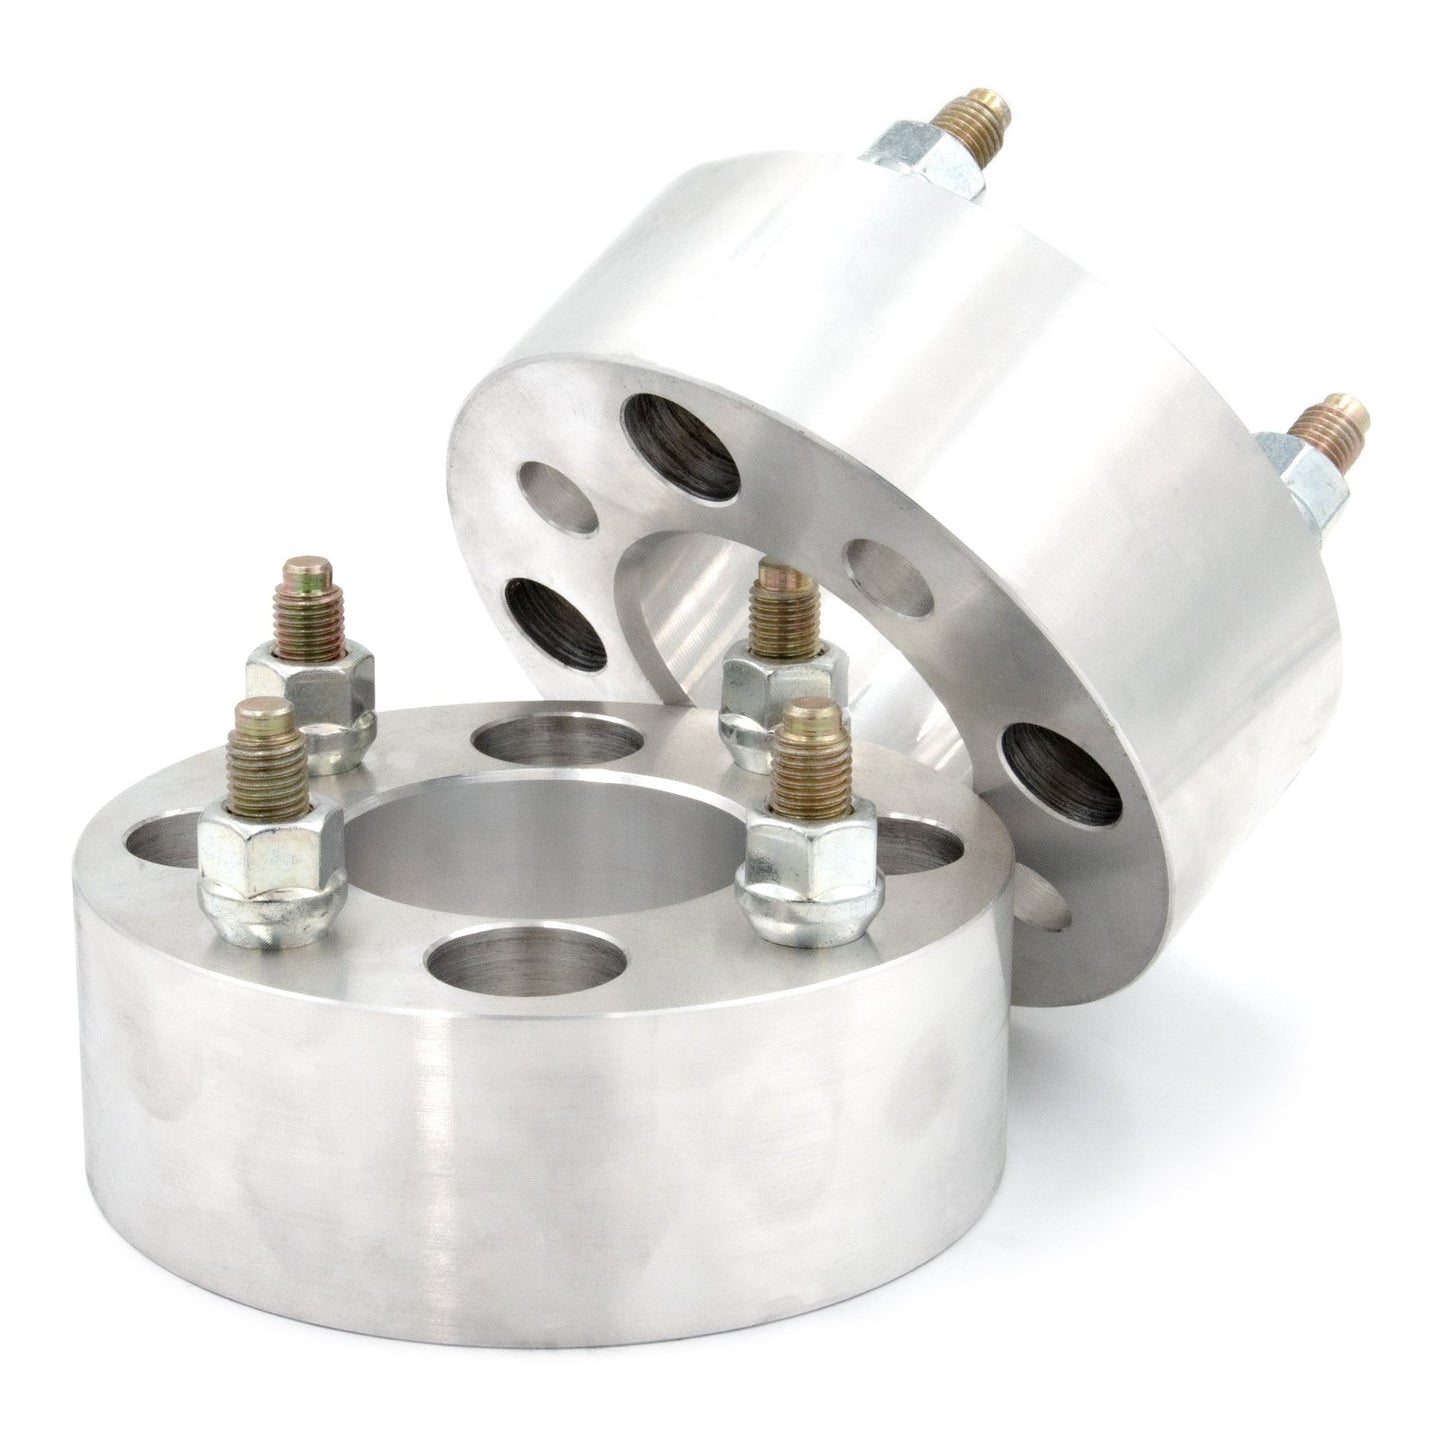 4x4" to 4x136 Wheel Spacer/Adapter - Thickness: 3/4"- 4"